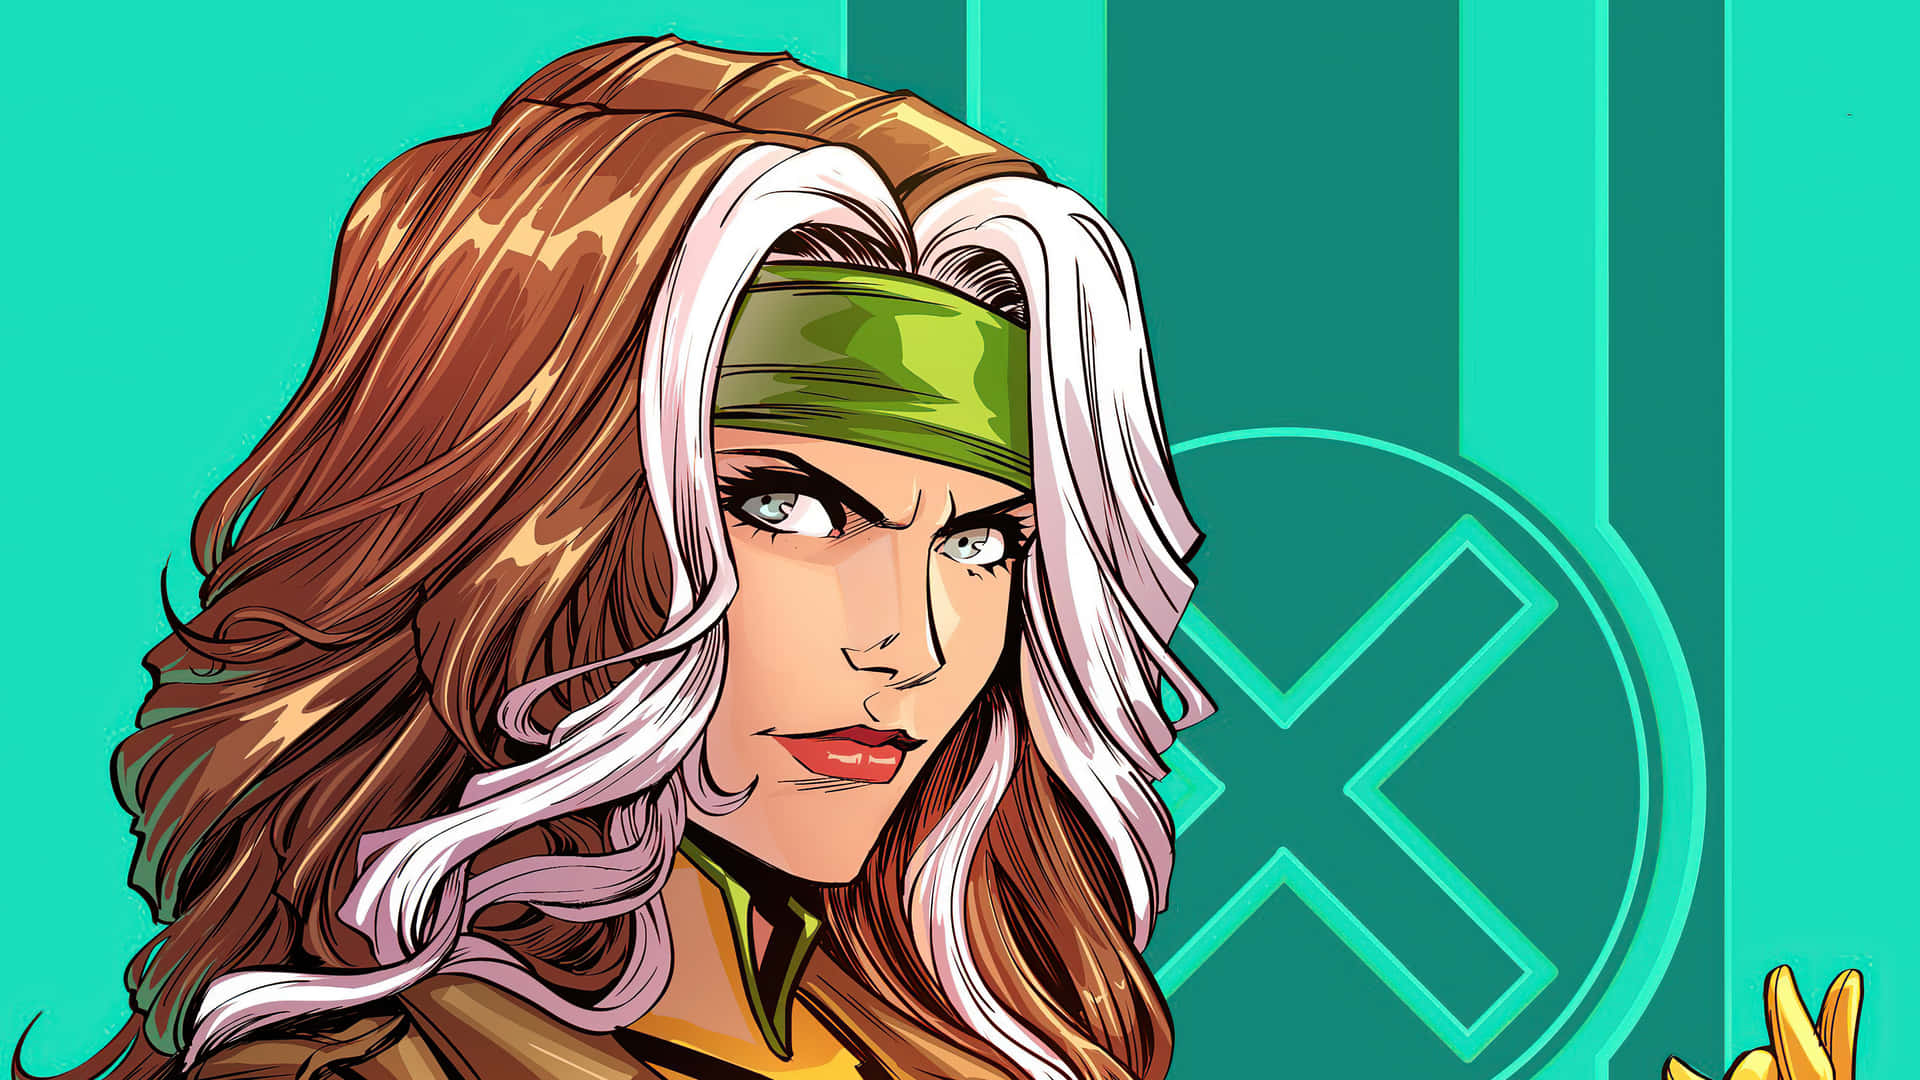 A Woman With Long Hair And Green Eyes Is Holding A Green - Colored Weapon Background